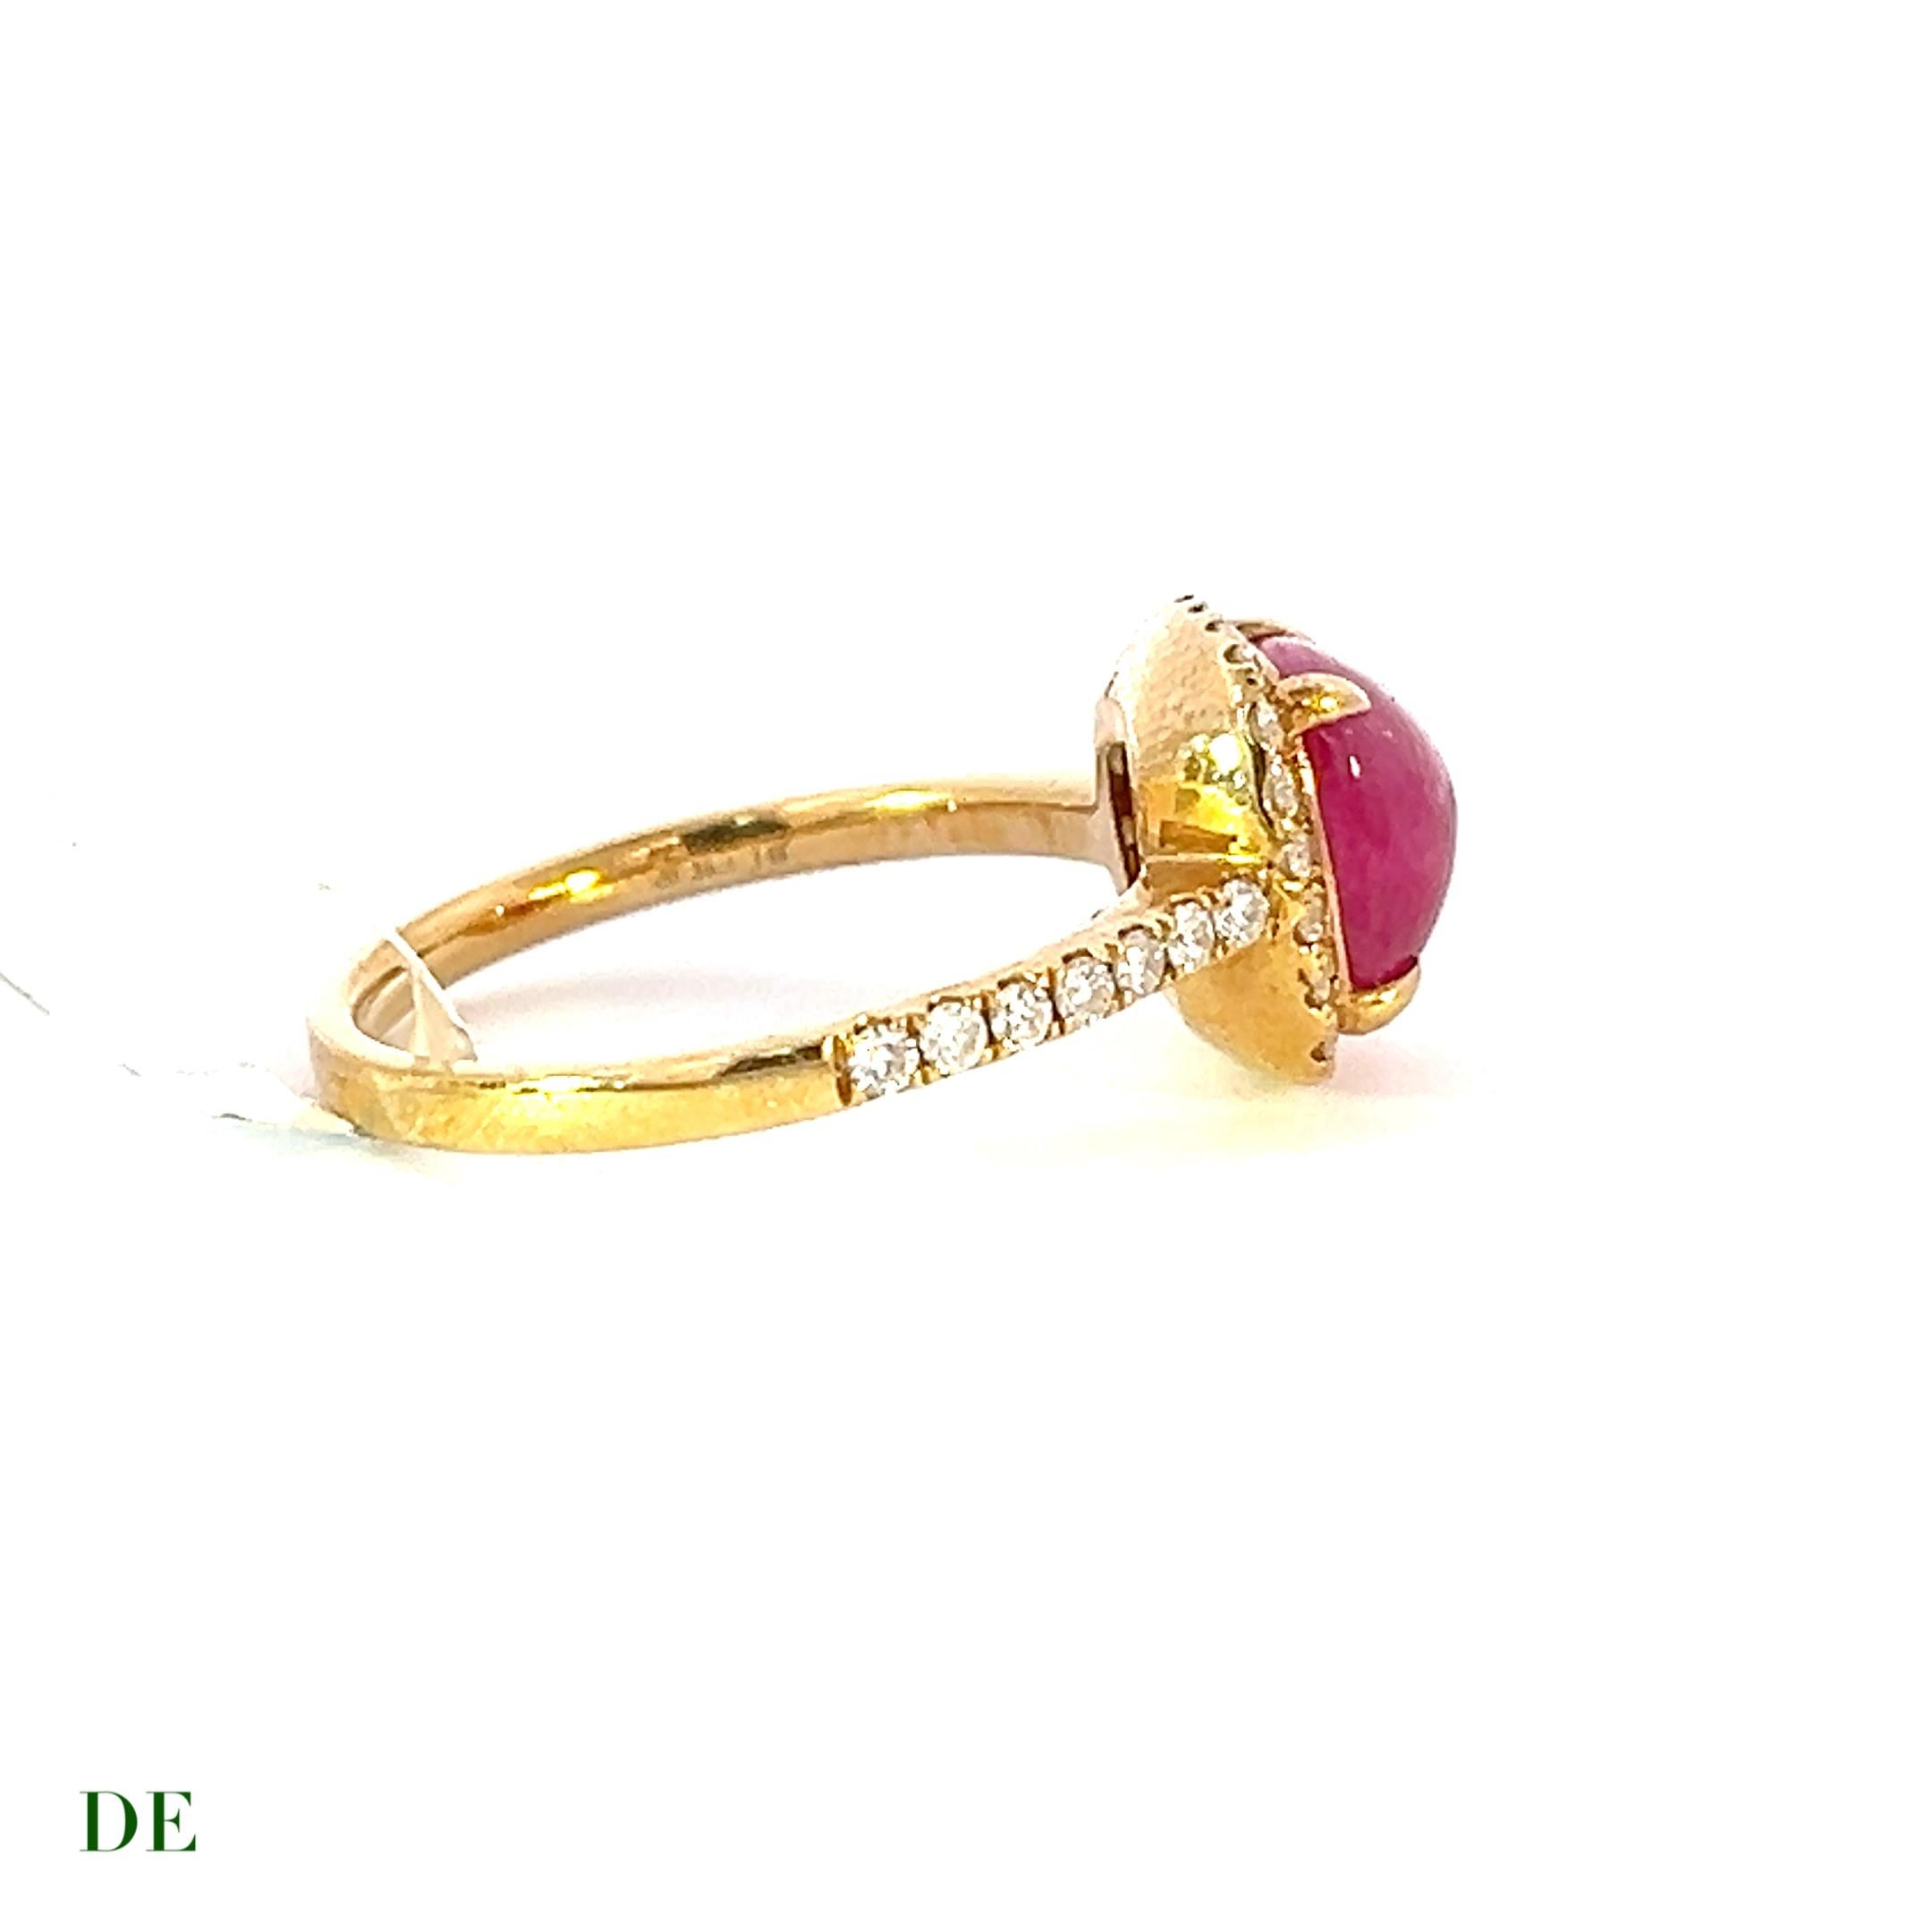 Elegant Classic Natural Cab Vibrant Ruby 2.68 ct 14k .36 ct Diamond Ring

Introducing the timeless Elegant Classic Natural Cab Vibrant Ruby and Diamond Ring. This exquisite ring features a stunning 2.68 carat natural cabochon ruby, known for its